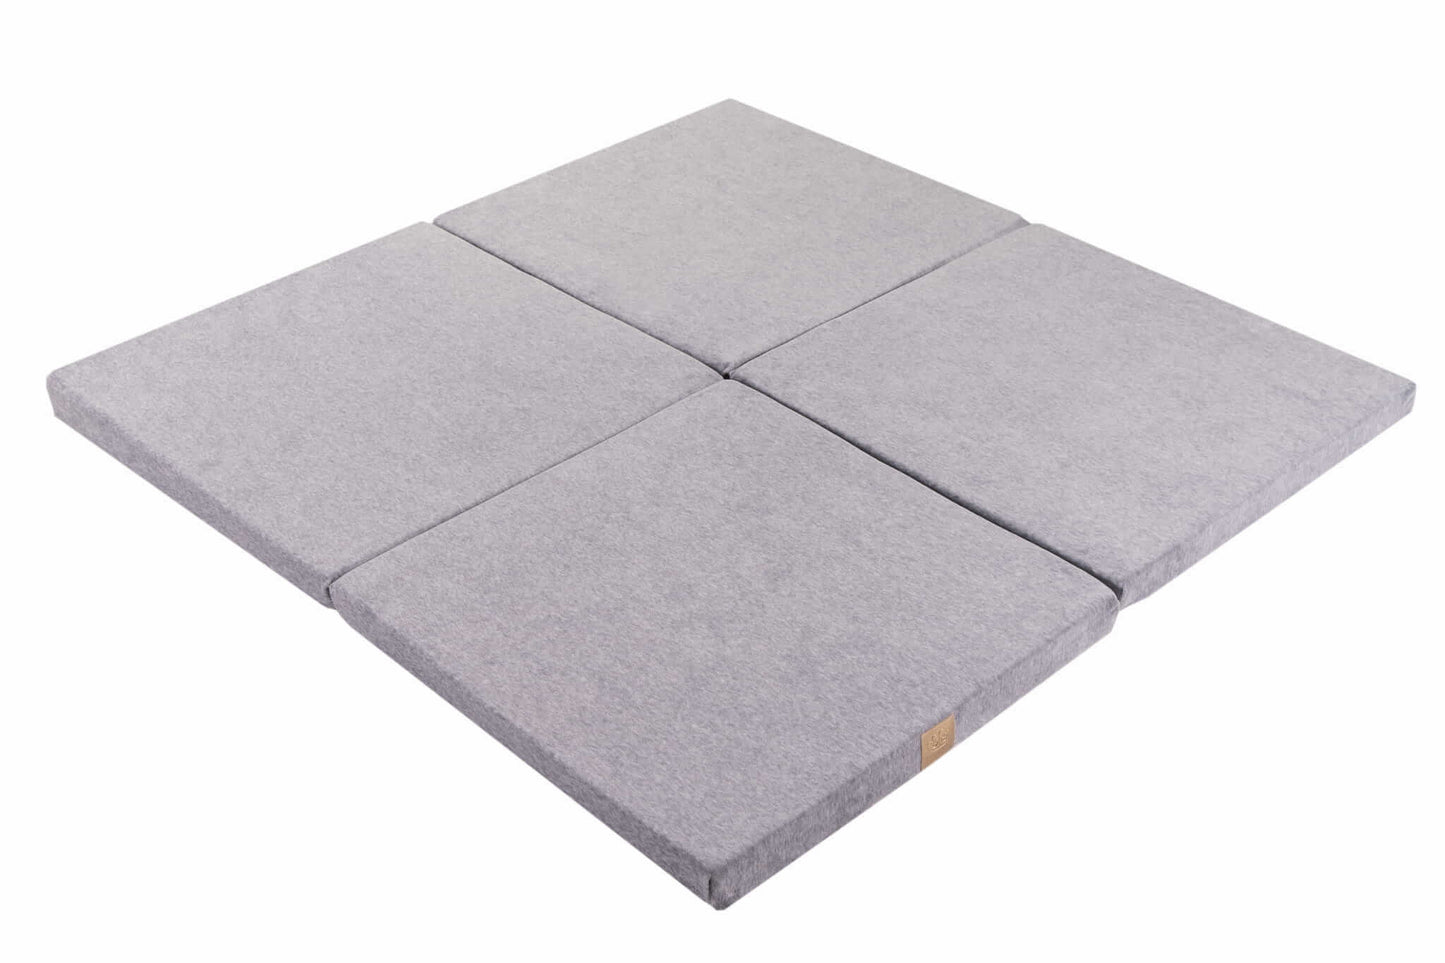 MeowBaby® Square Folding Mattress Square playmat Playmat for children